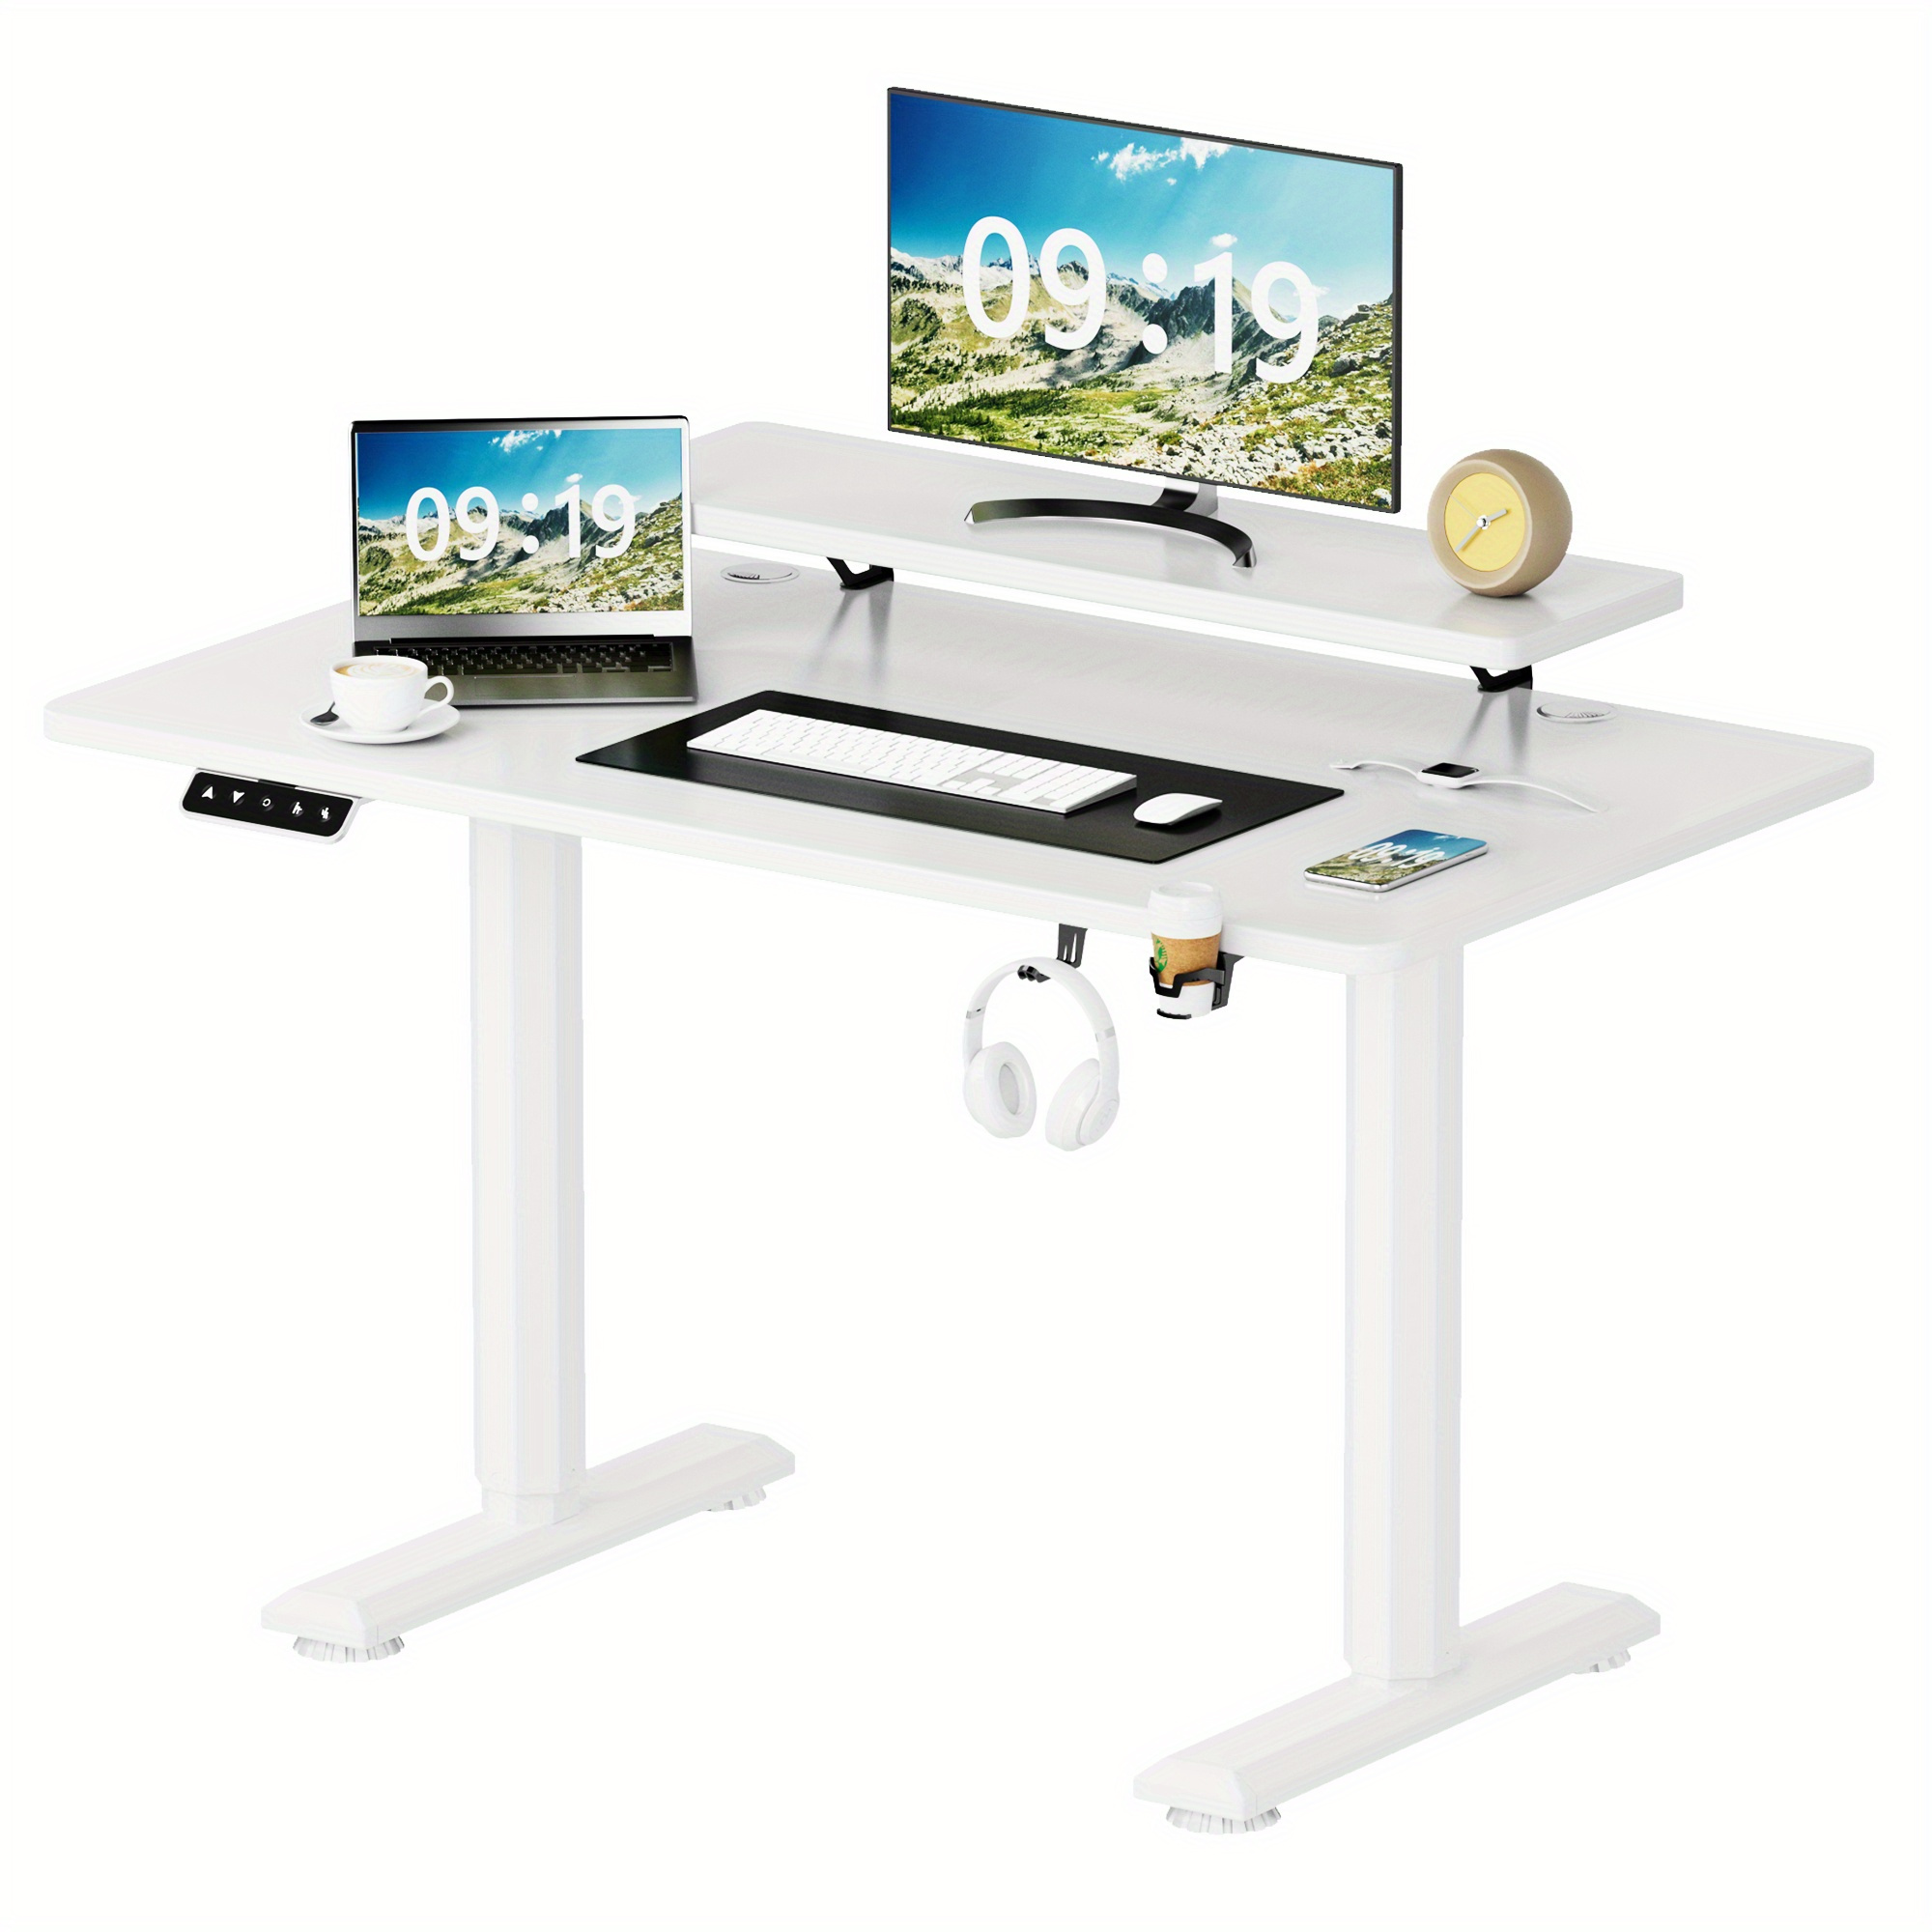 

Electric Standing Desk With Monitor And Laptop Workstation, 55 X 24 Inches Height Adjustable Sit Stand Up Desk, Computer Workstation With Cup Holder And Hook, Holes For Cables